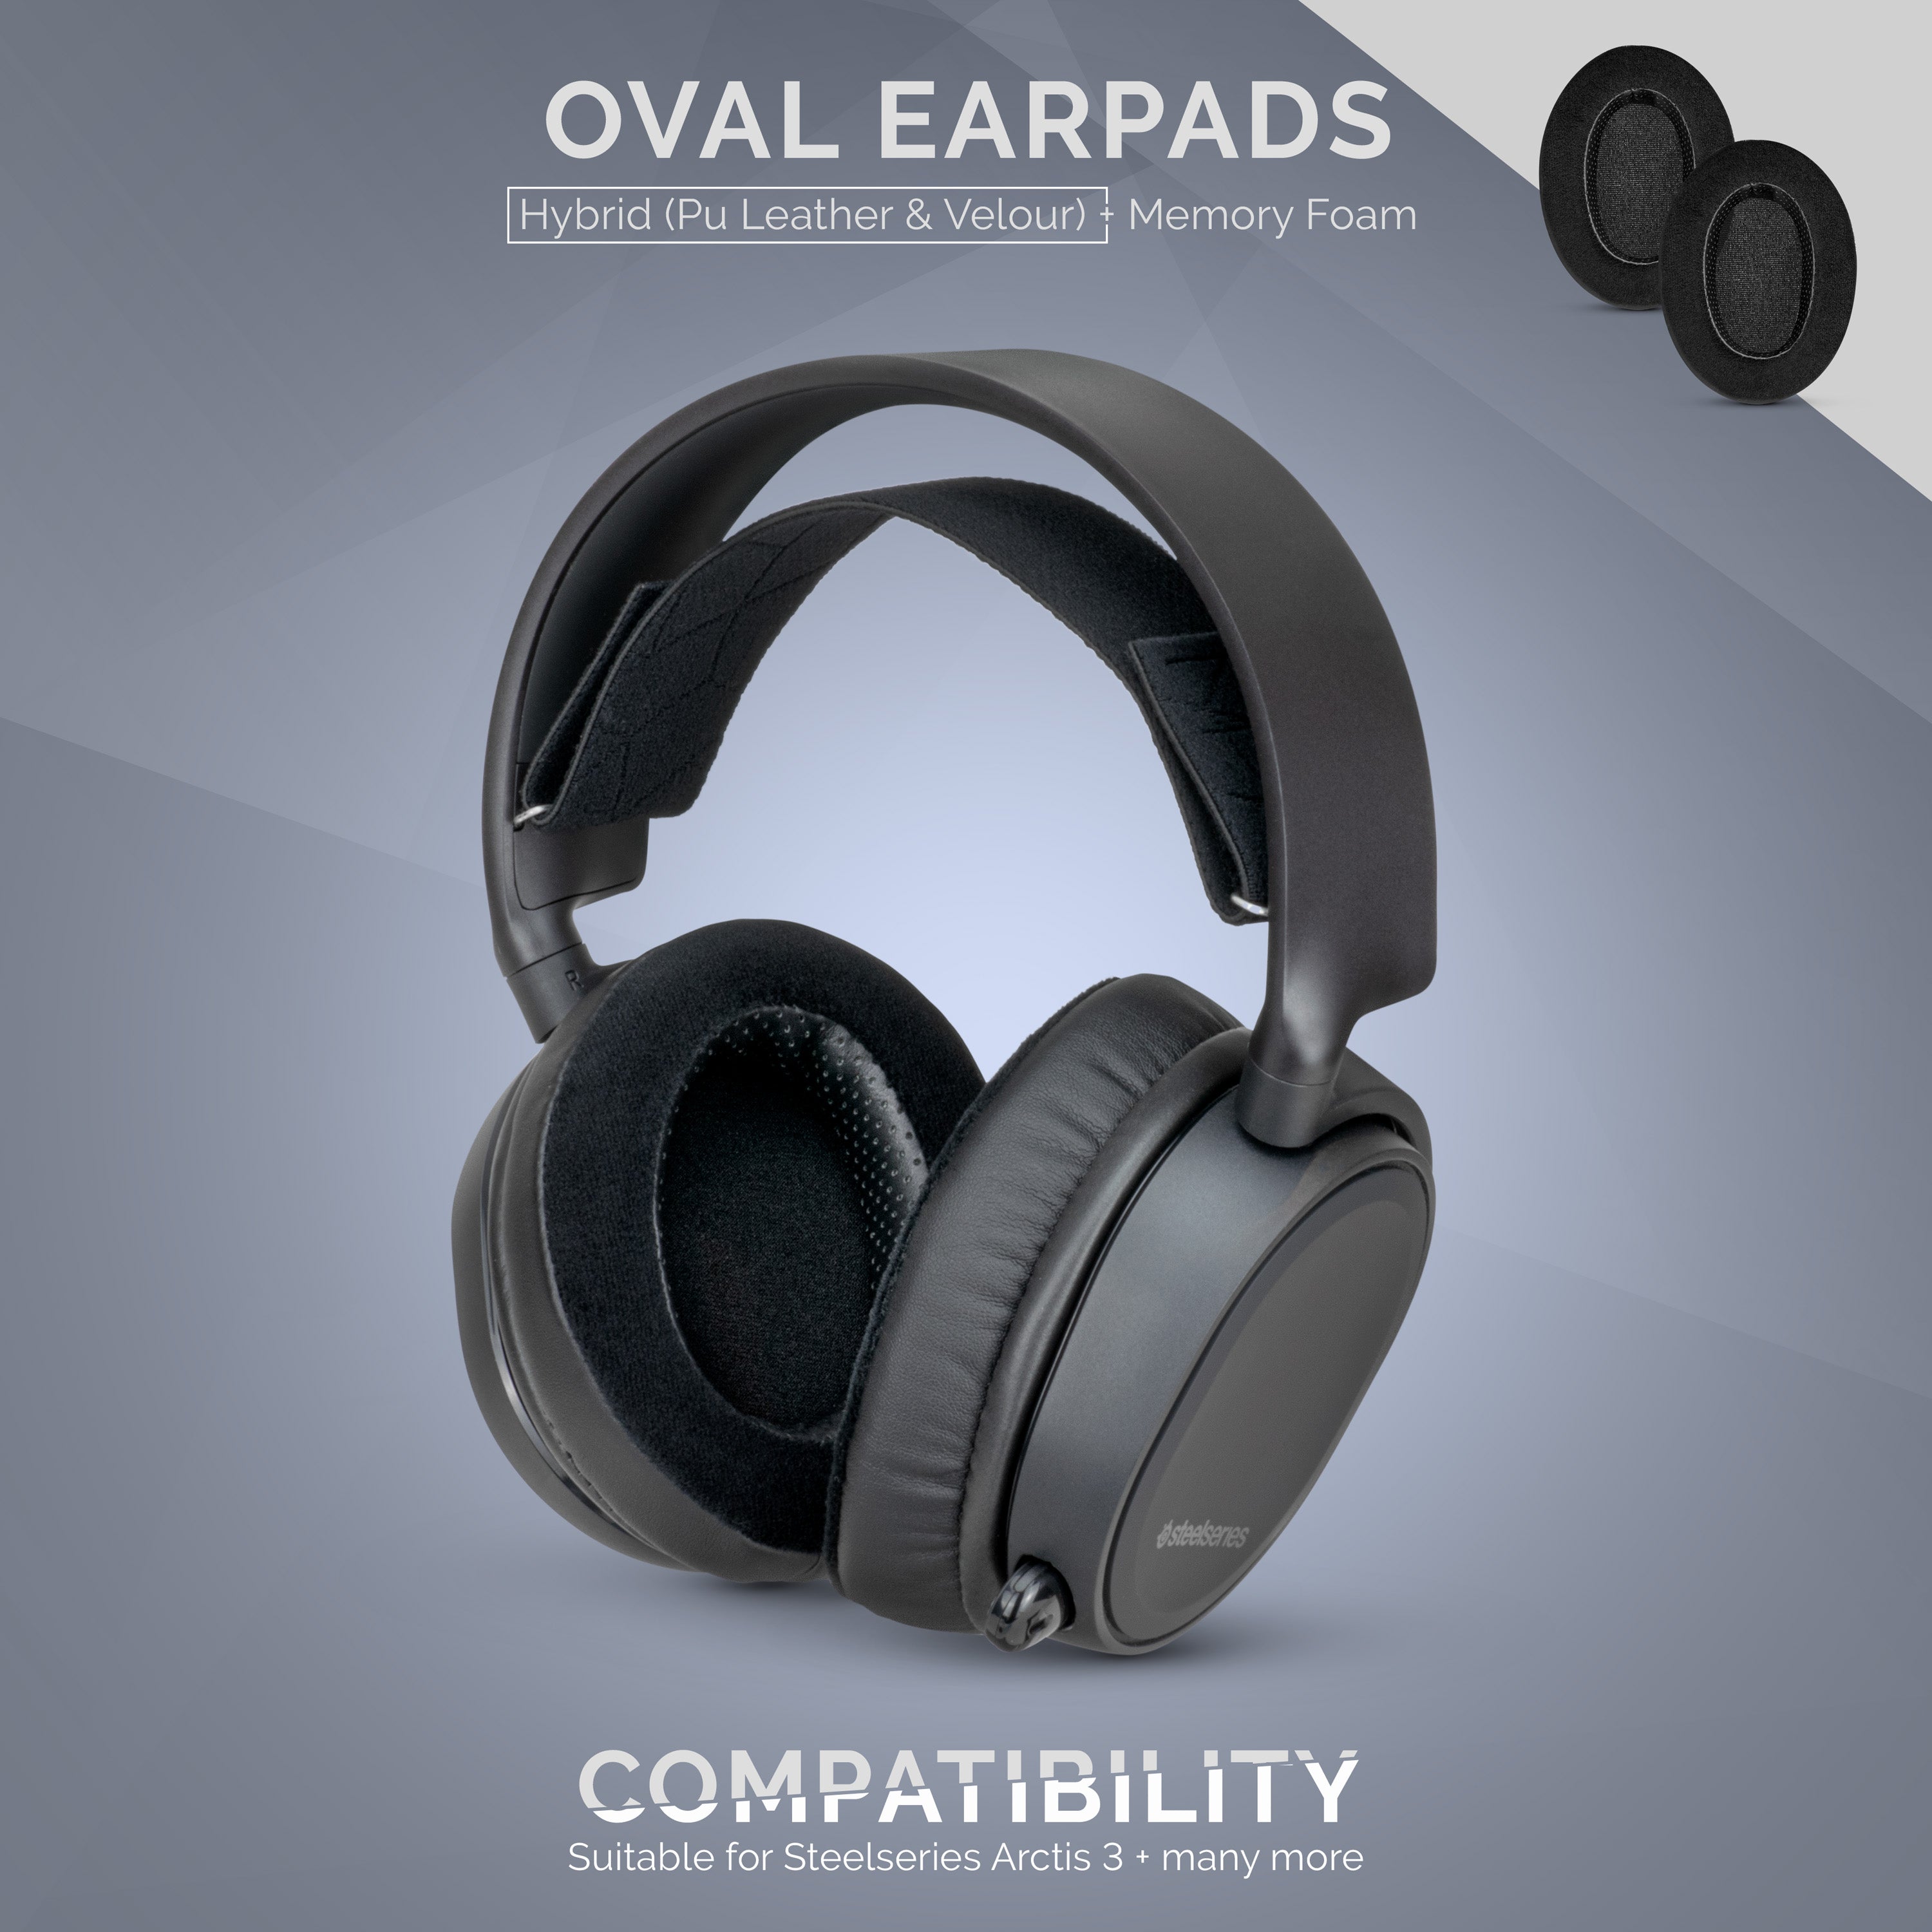 Upgraded Earpads for Gaming, With Cooling Gel, Memory foam & Micro Suede,  Ideal for Long Wearing, Oval, For Steelseries, HyperX, ATH-M50X & More -  Brainwavz Audio